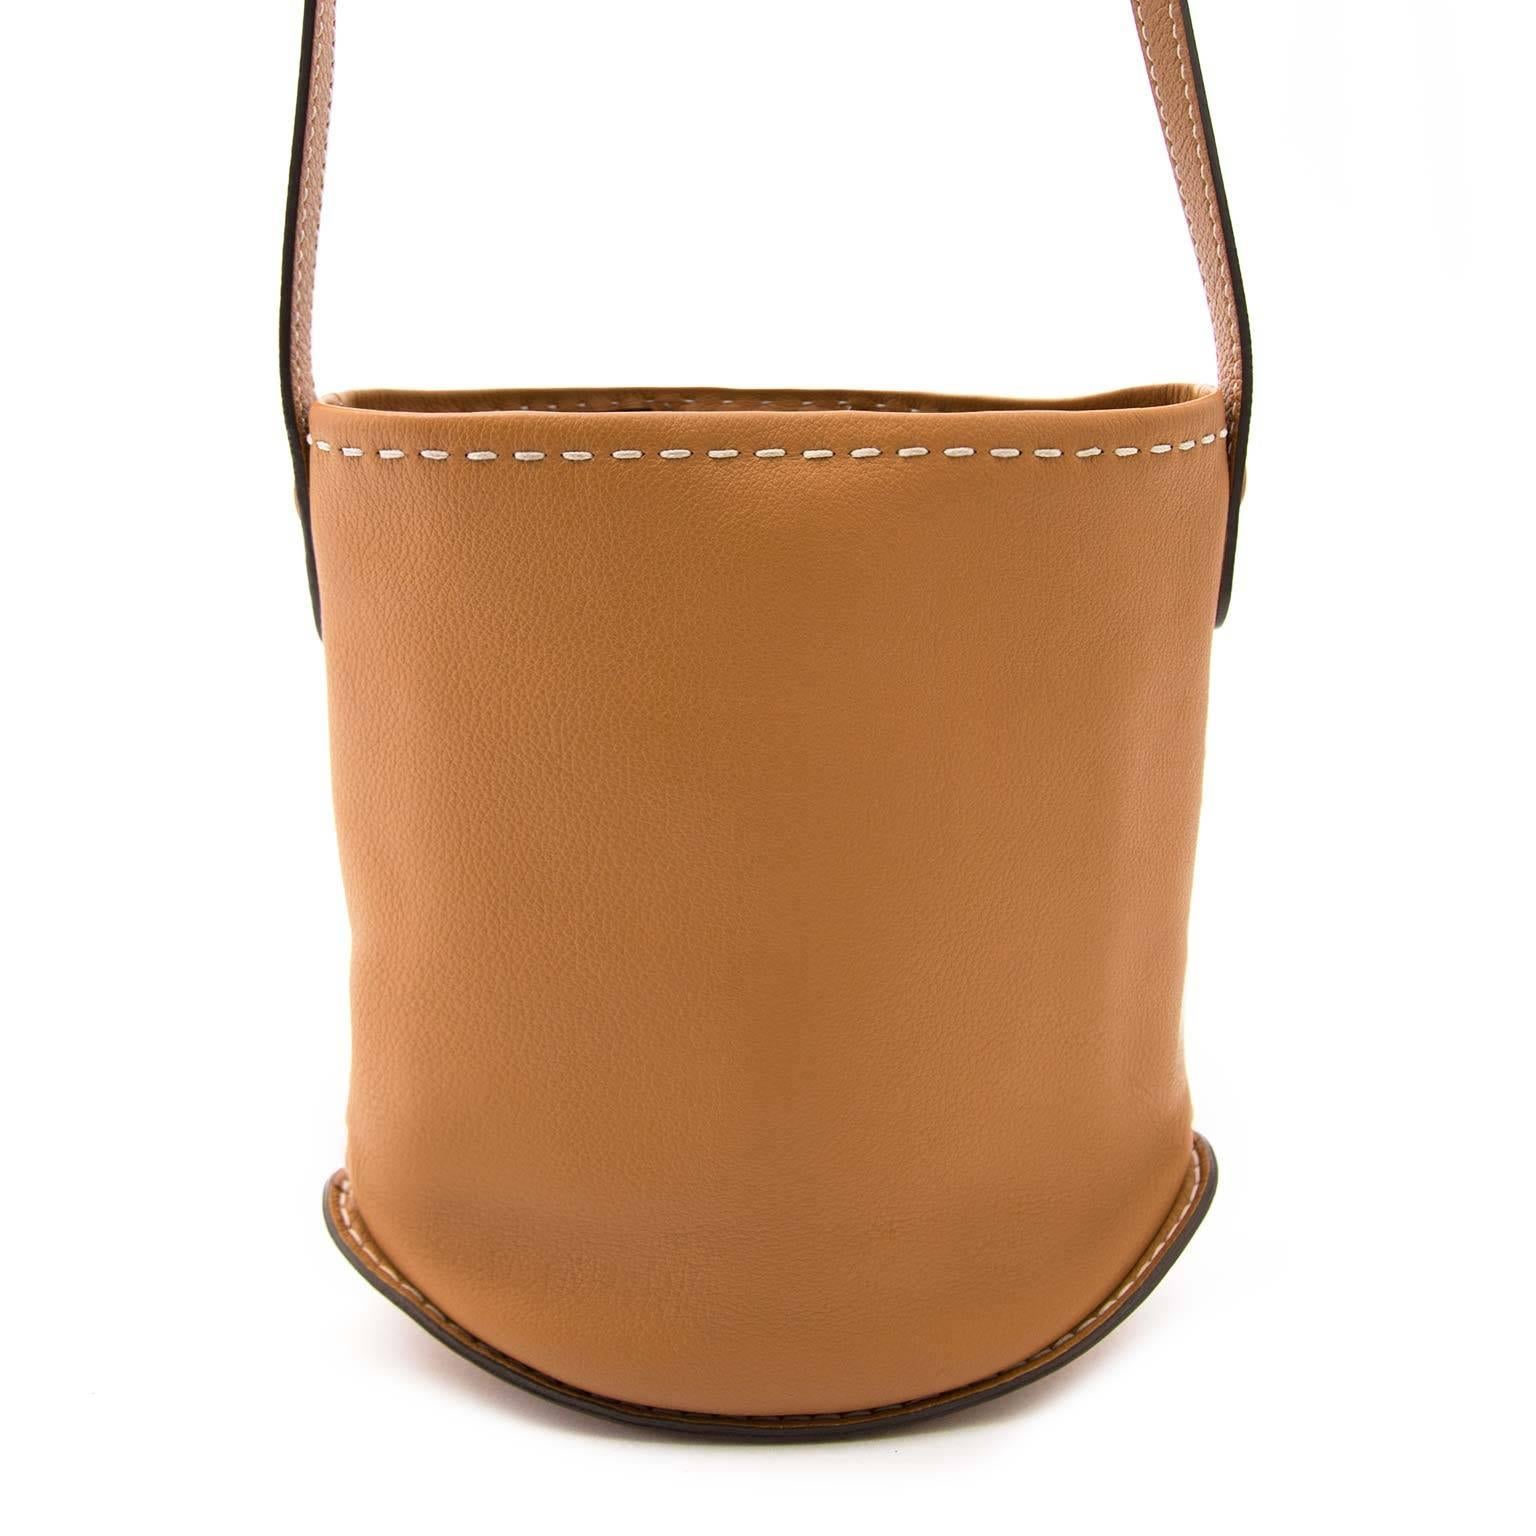 Delvaux Le Pin Mini Surpique Vegetale

One of Delvaux icons this Delvaux Le Pin Mini in vegetale leather.
Handcrafted of smooth leather, Delvaux's Le Pin mini shoulder bag is detailed at the front with a D-shaped patch pocket and cutout